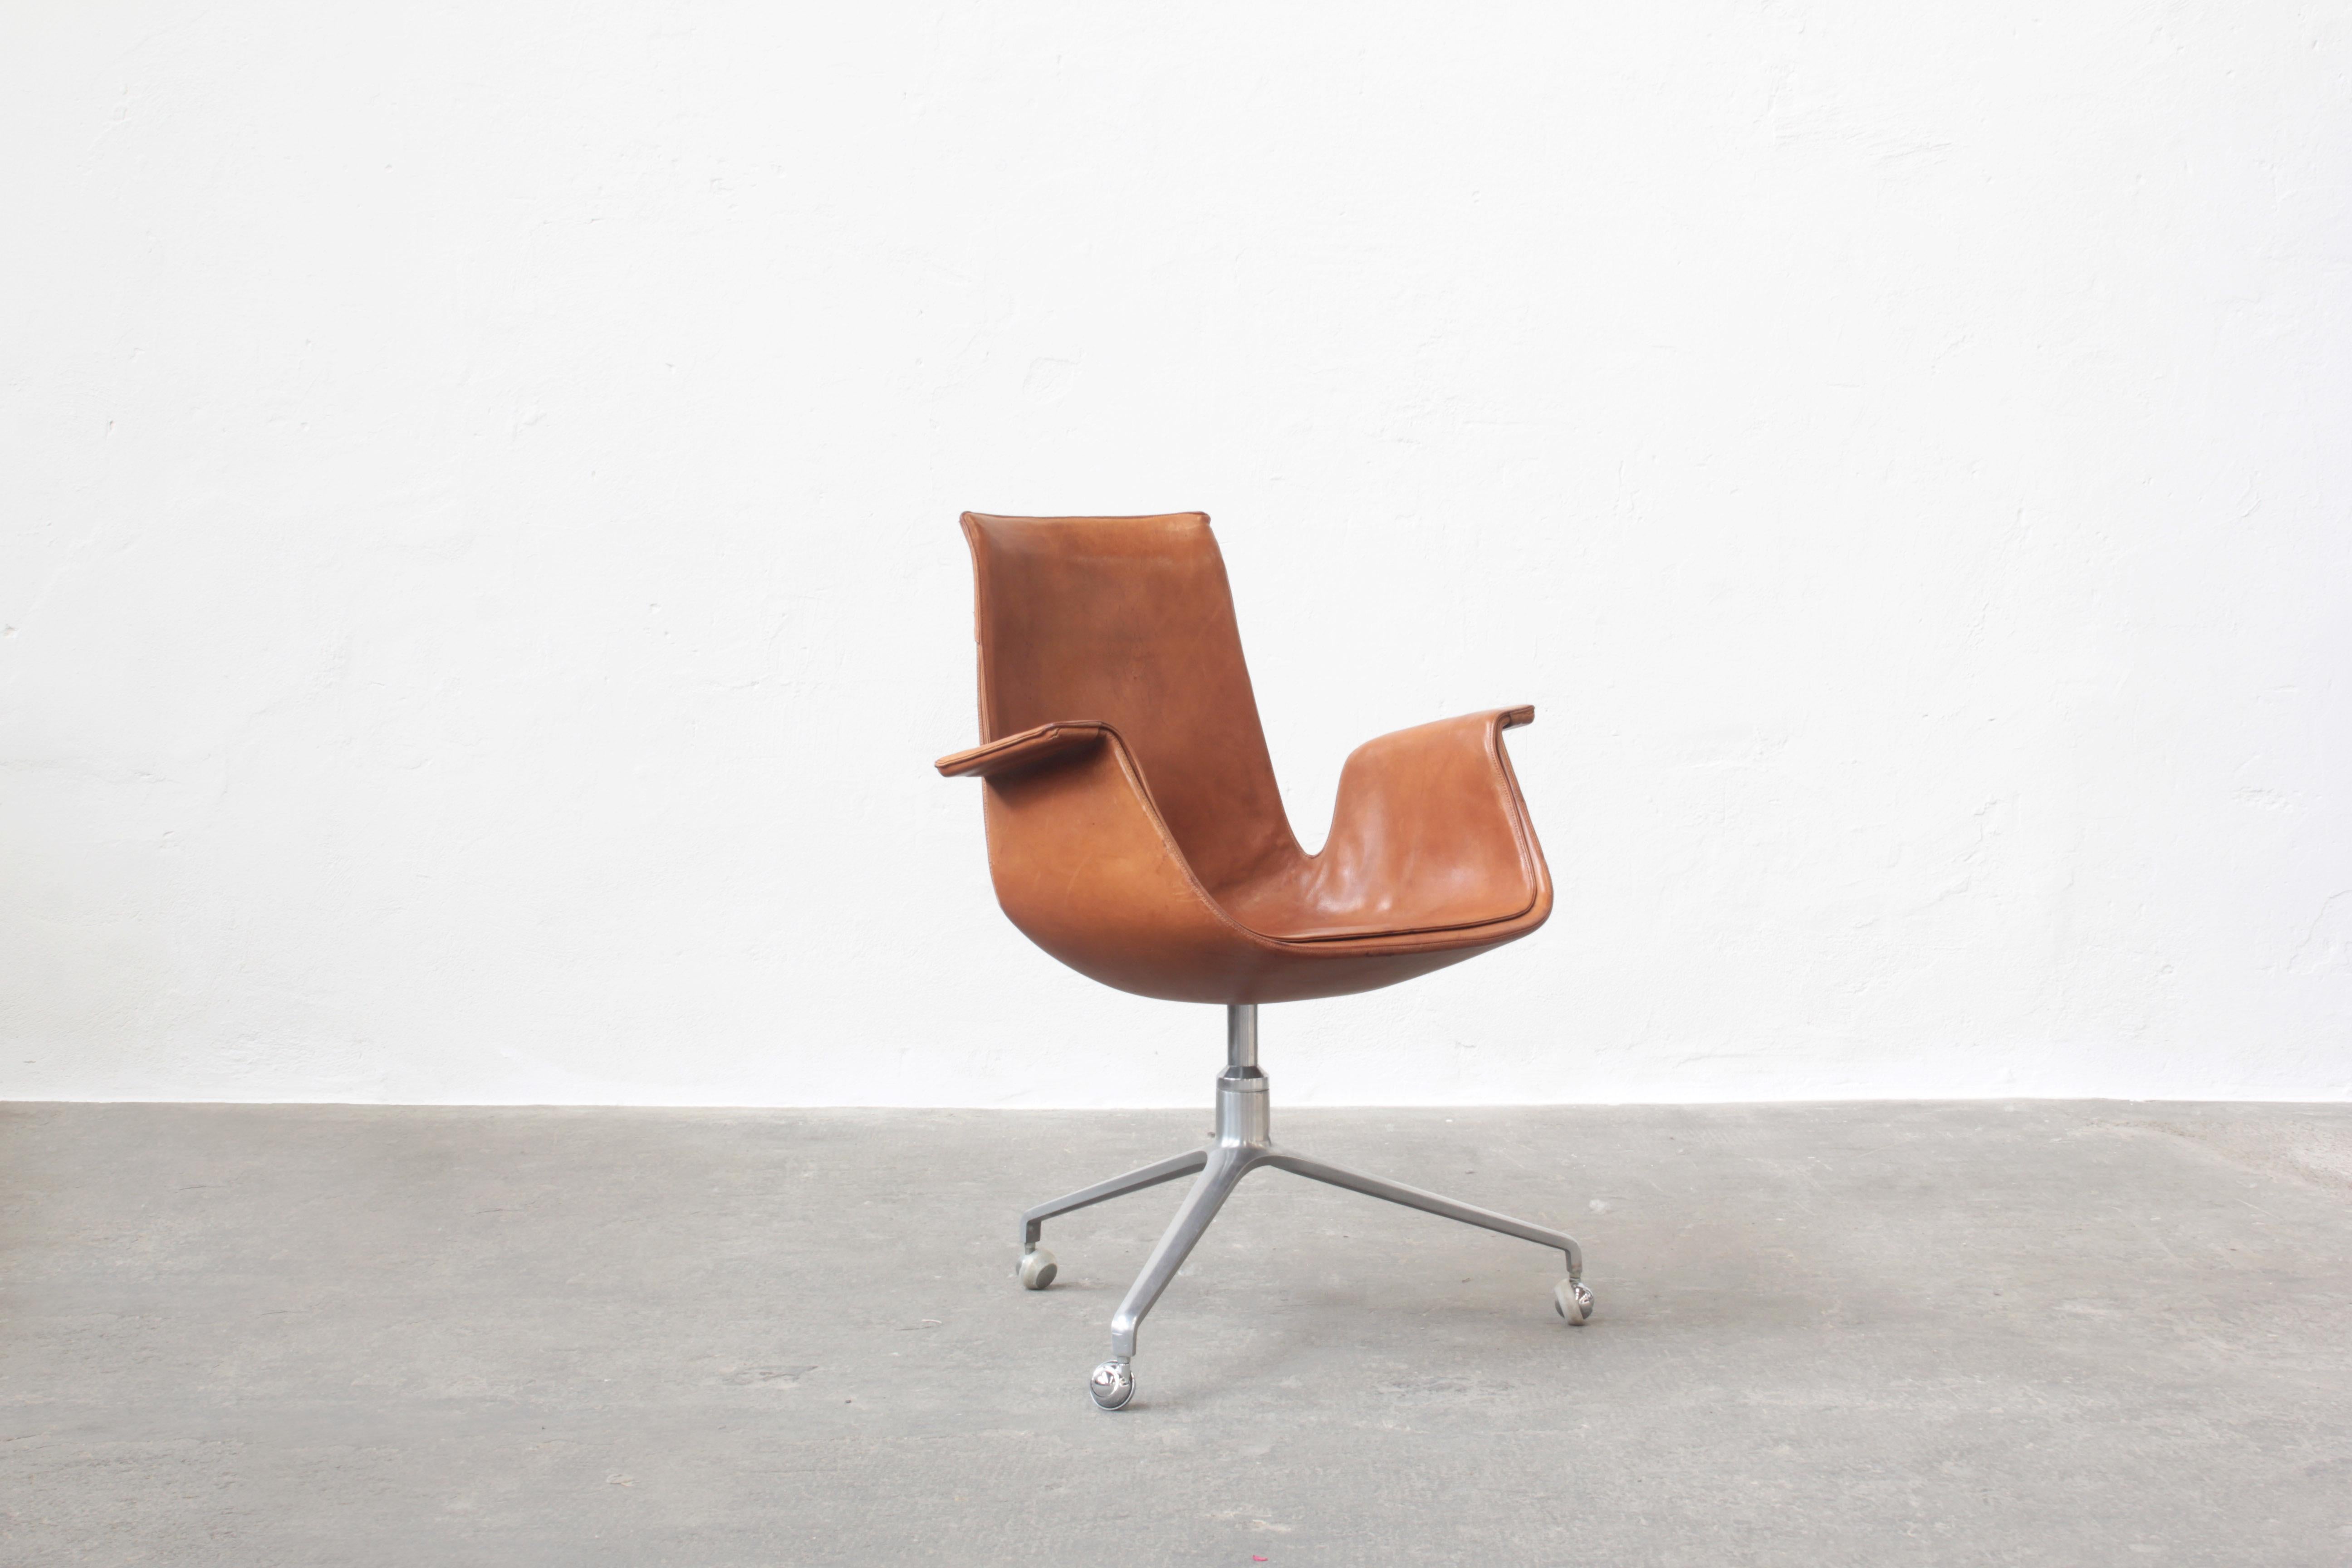 Beautiful tulip chair designed by Preben Fabricius and Jørgen Kastholm and produced by Alfred Kill International. 
The chair comes in an original condition with beautifully patinated leather in cognac brown.
The leather has some small scratches on